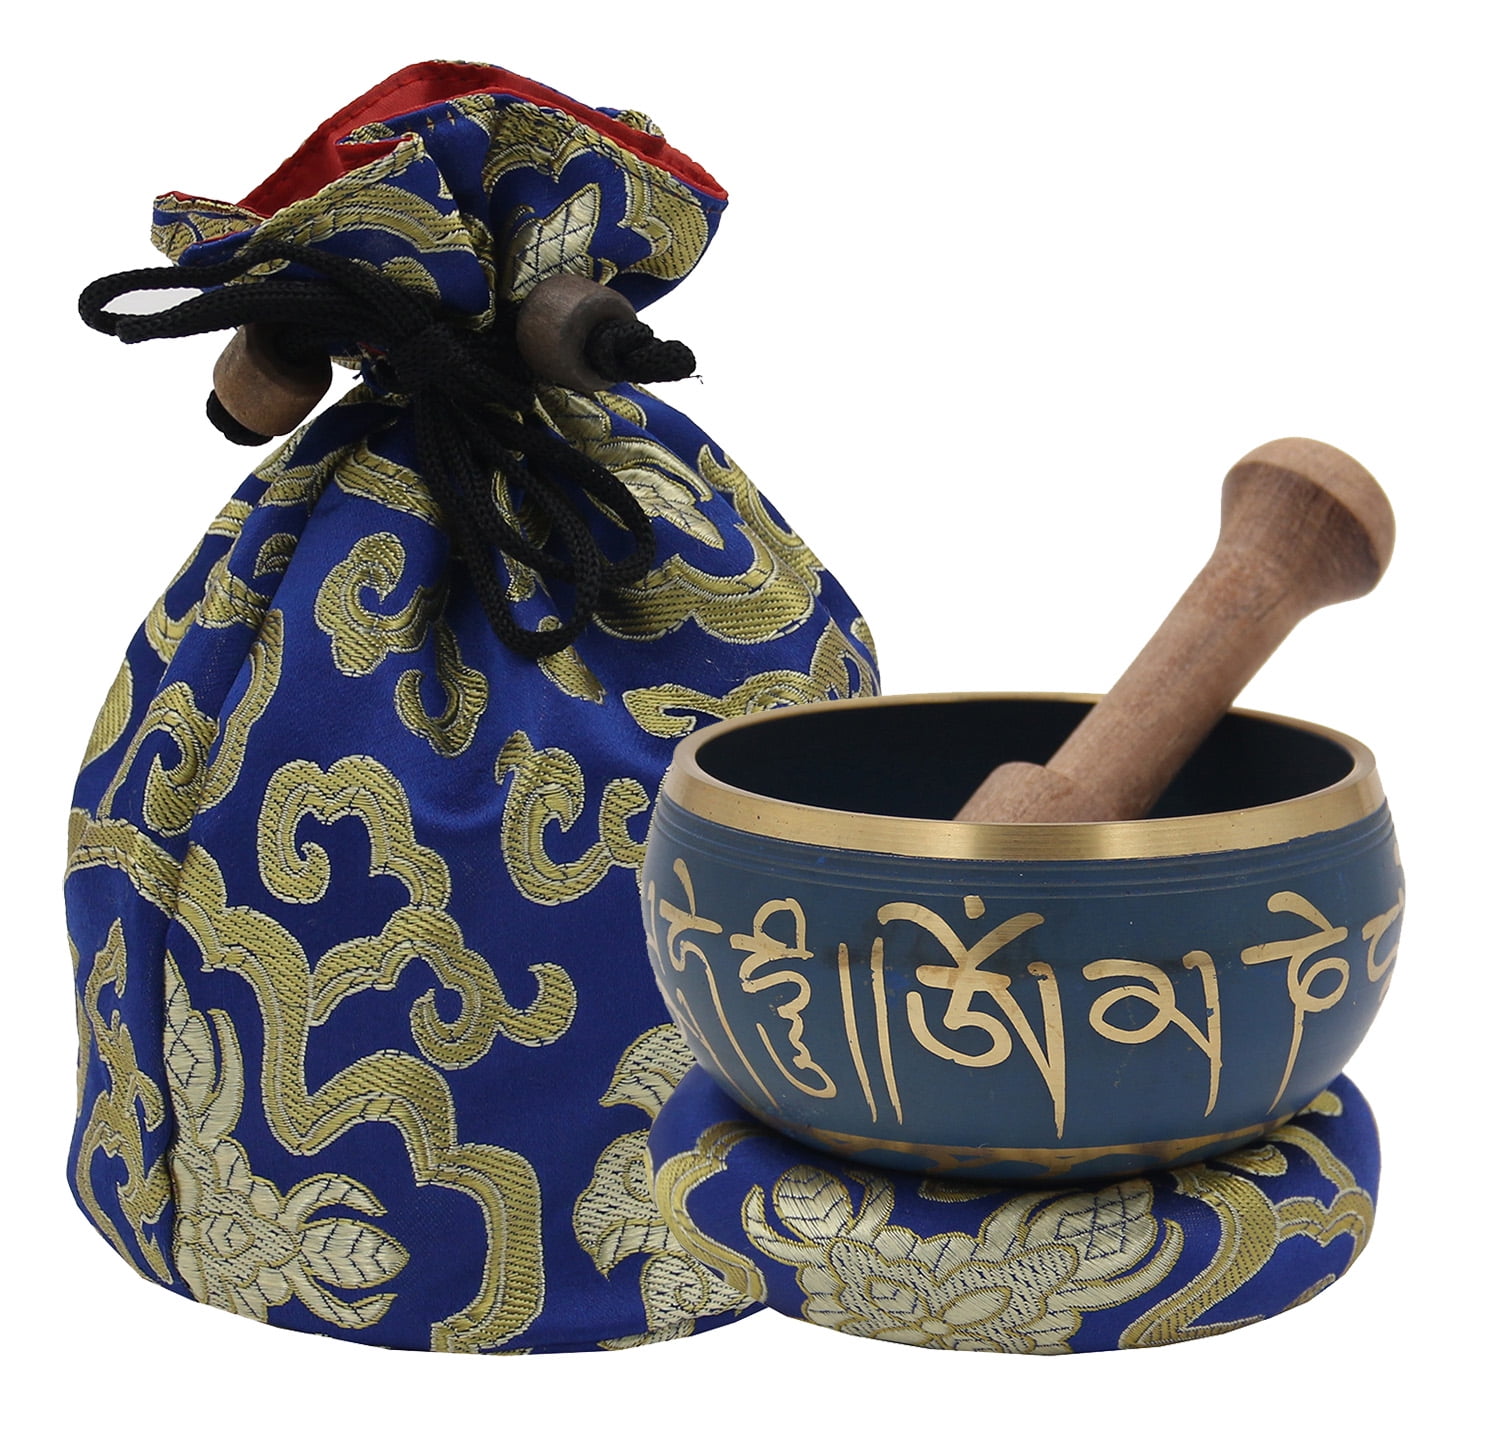 Mallet 4.33 Inch, Pale Blue Zen Reiki Healing Chakra and Music Handmade in Nepal Relaxation Ring Silk Cushion for Yoga Tibetan Meditation Singing Bowl Set With Travel Box 